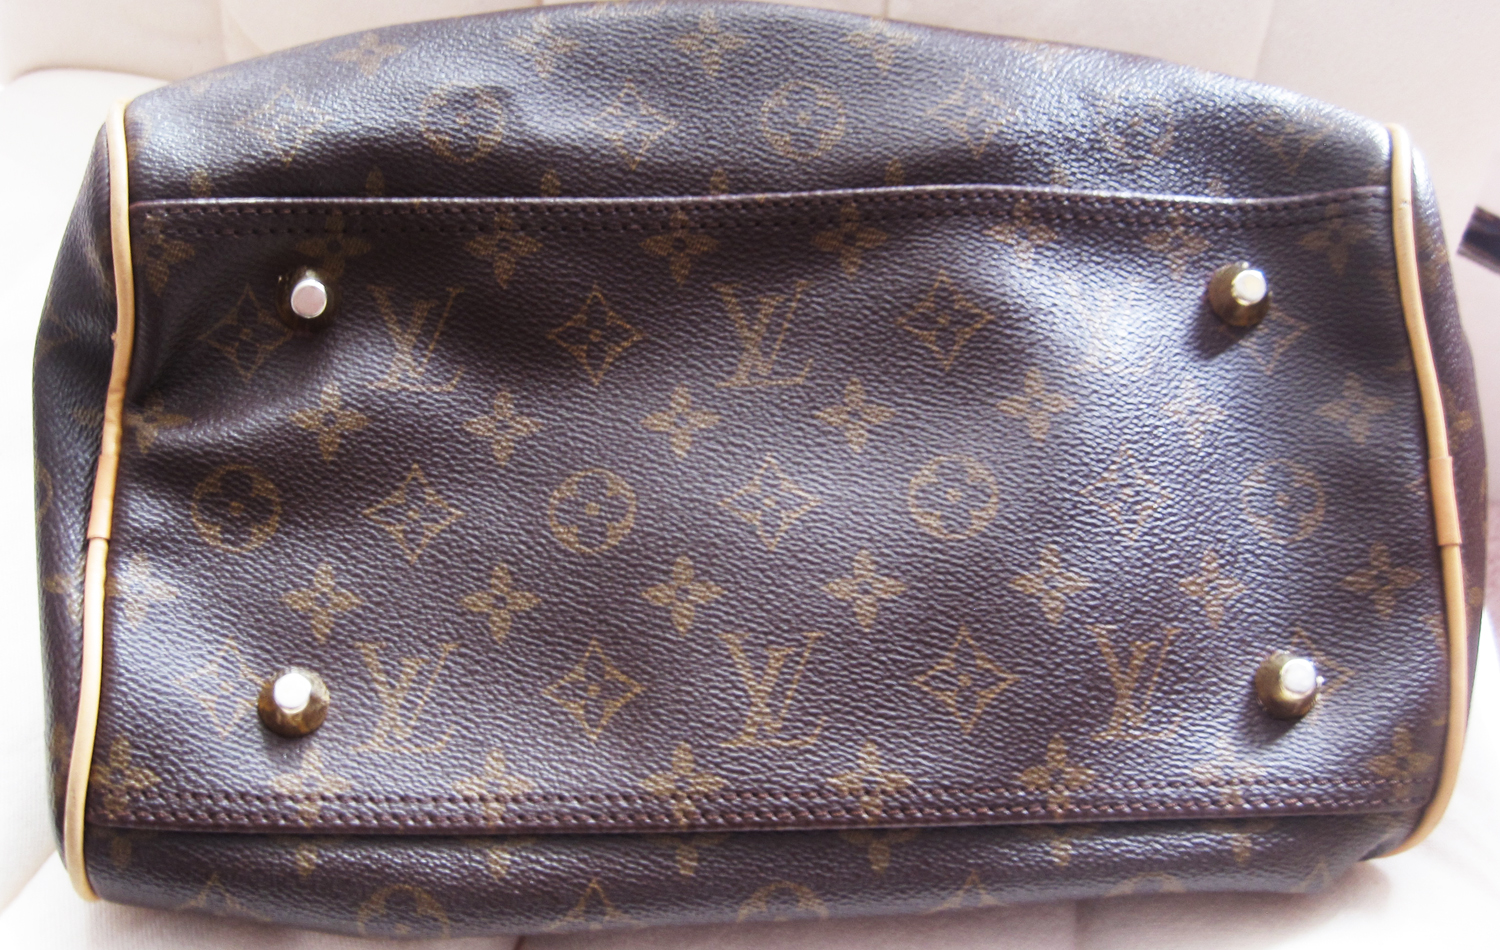 What’s Inside of a Fake Louis Vuitton Speedy?